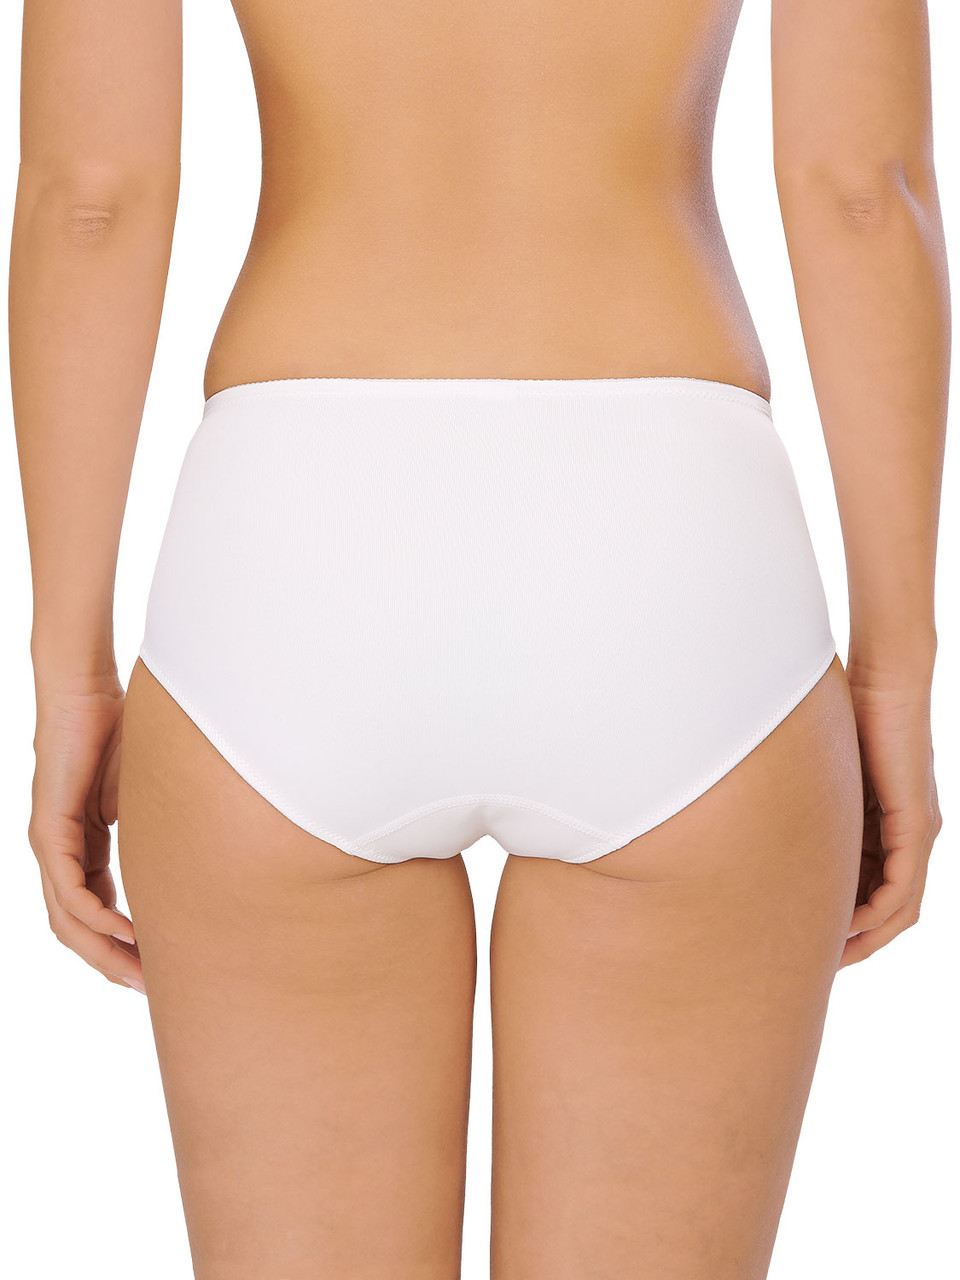 Perfect Body High Waist Seamless Shaping Panty Girdle (S-4XL) by Naturana  0061